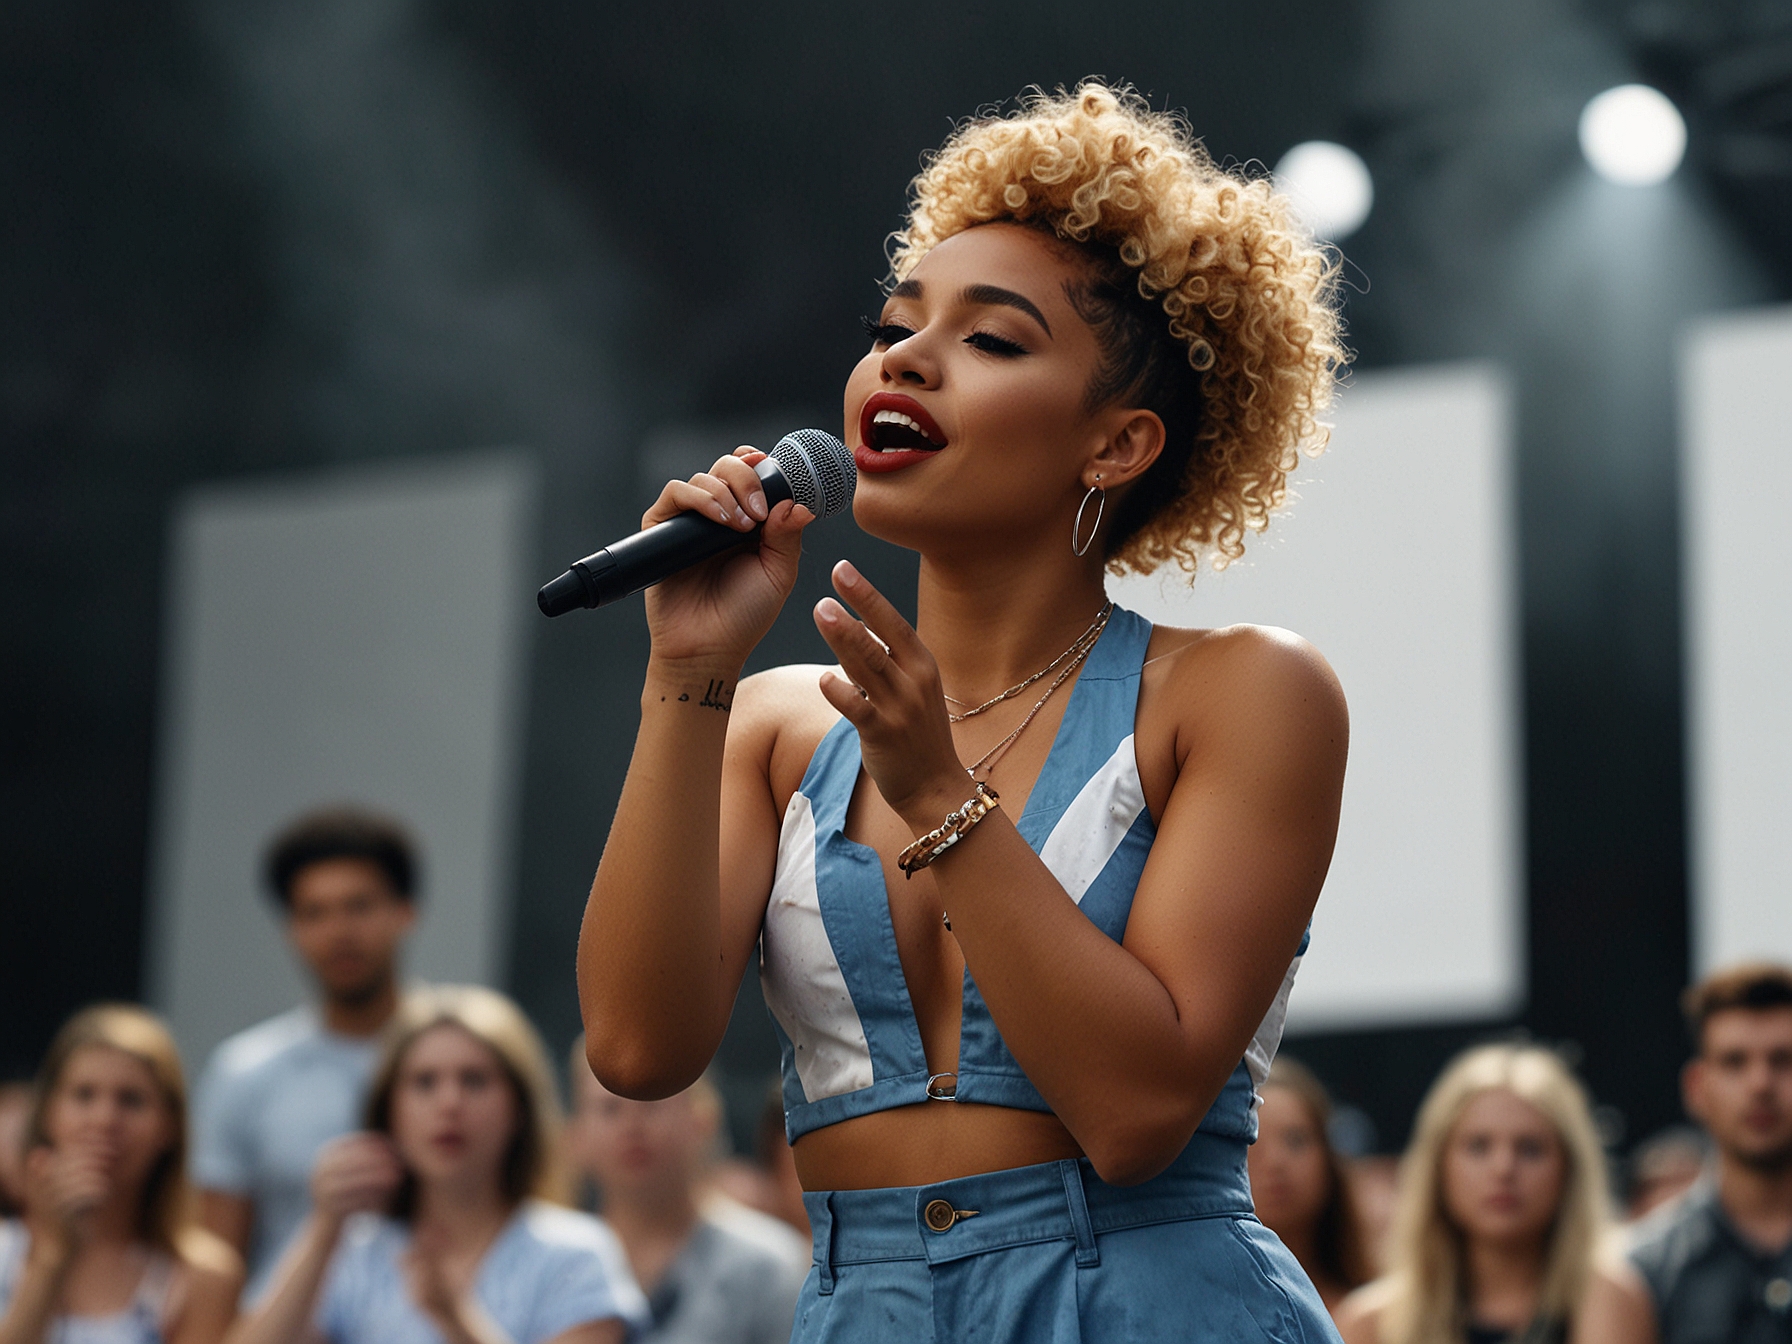 Raye on stage at Capital's Summertime Ball, addressing the audience with an emotional speech about her experience with sexual violence before performing her song 'Ice Cream Man'.